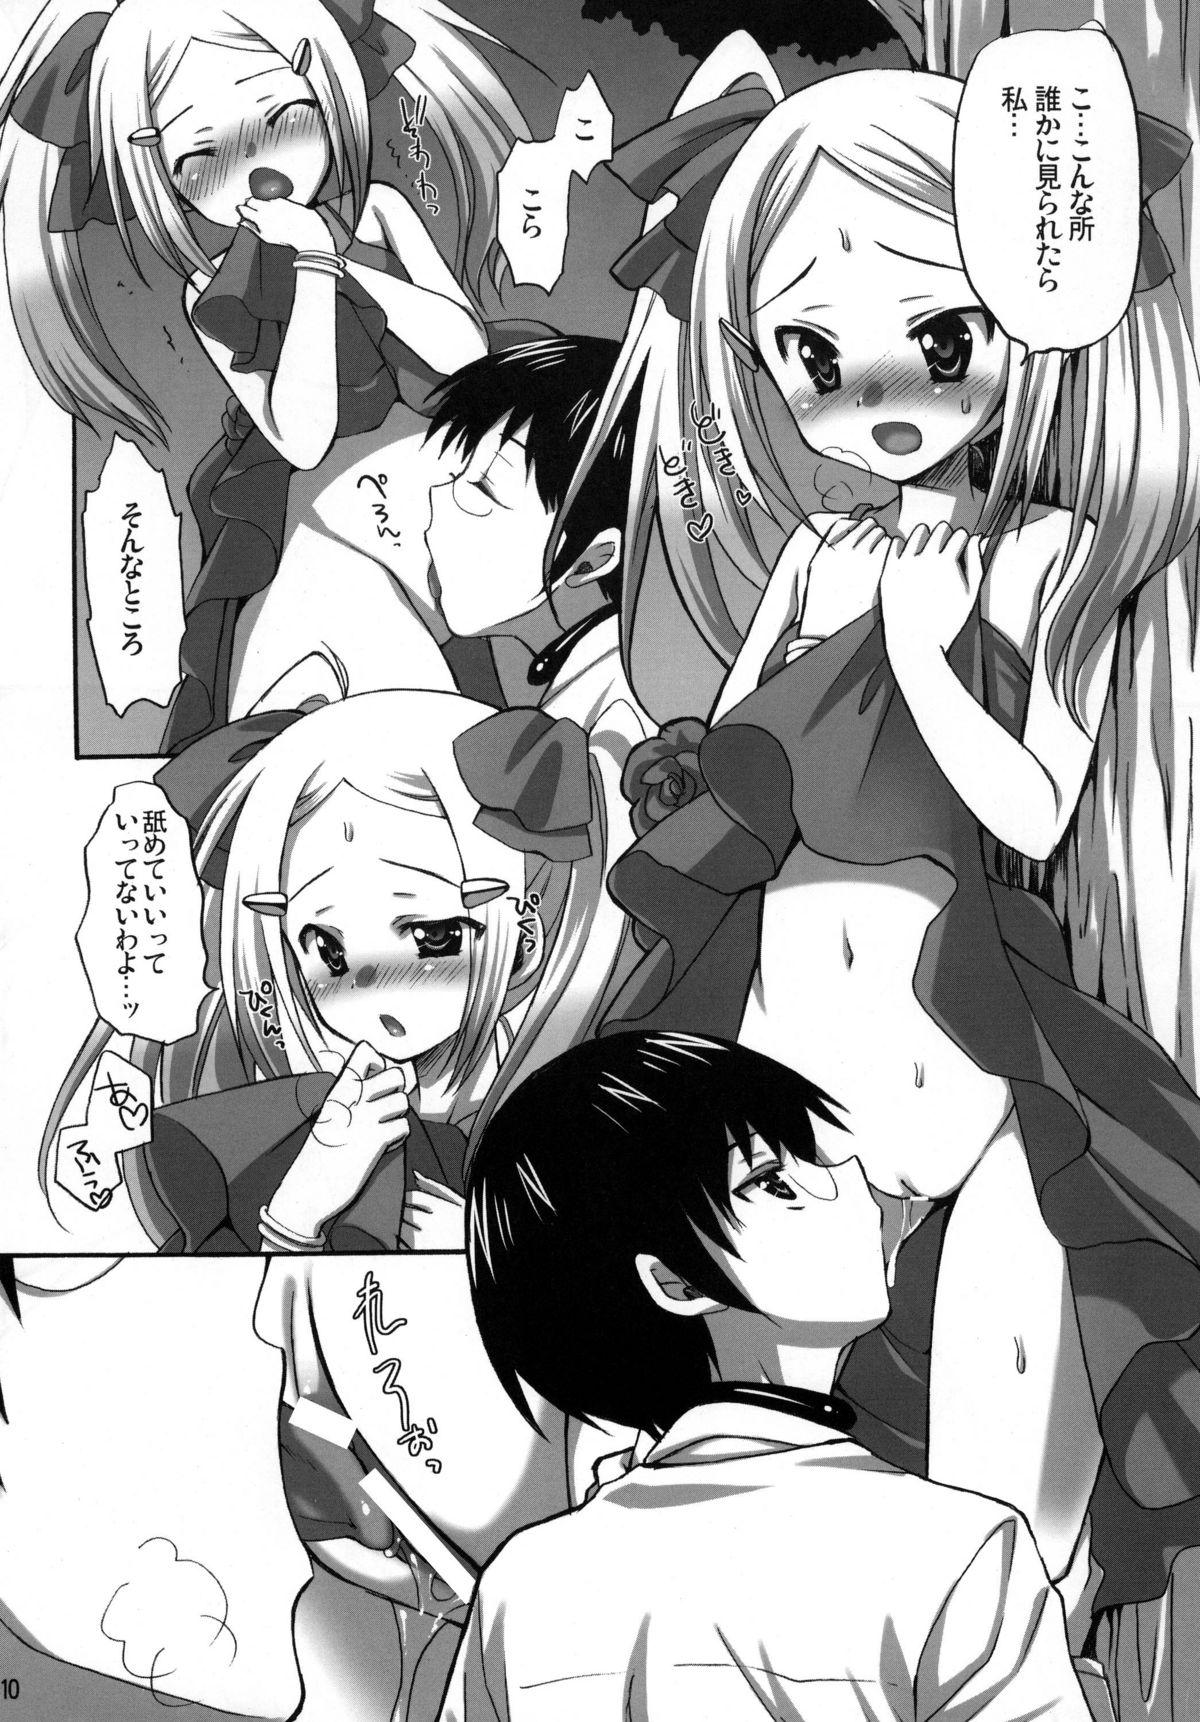 Pussylick Kami Nomi zo Fullcomp - The world god only knows Pete - Page 10